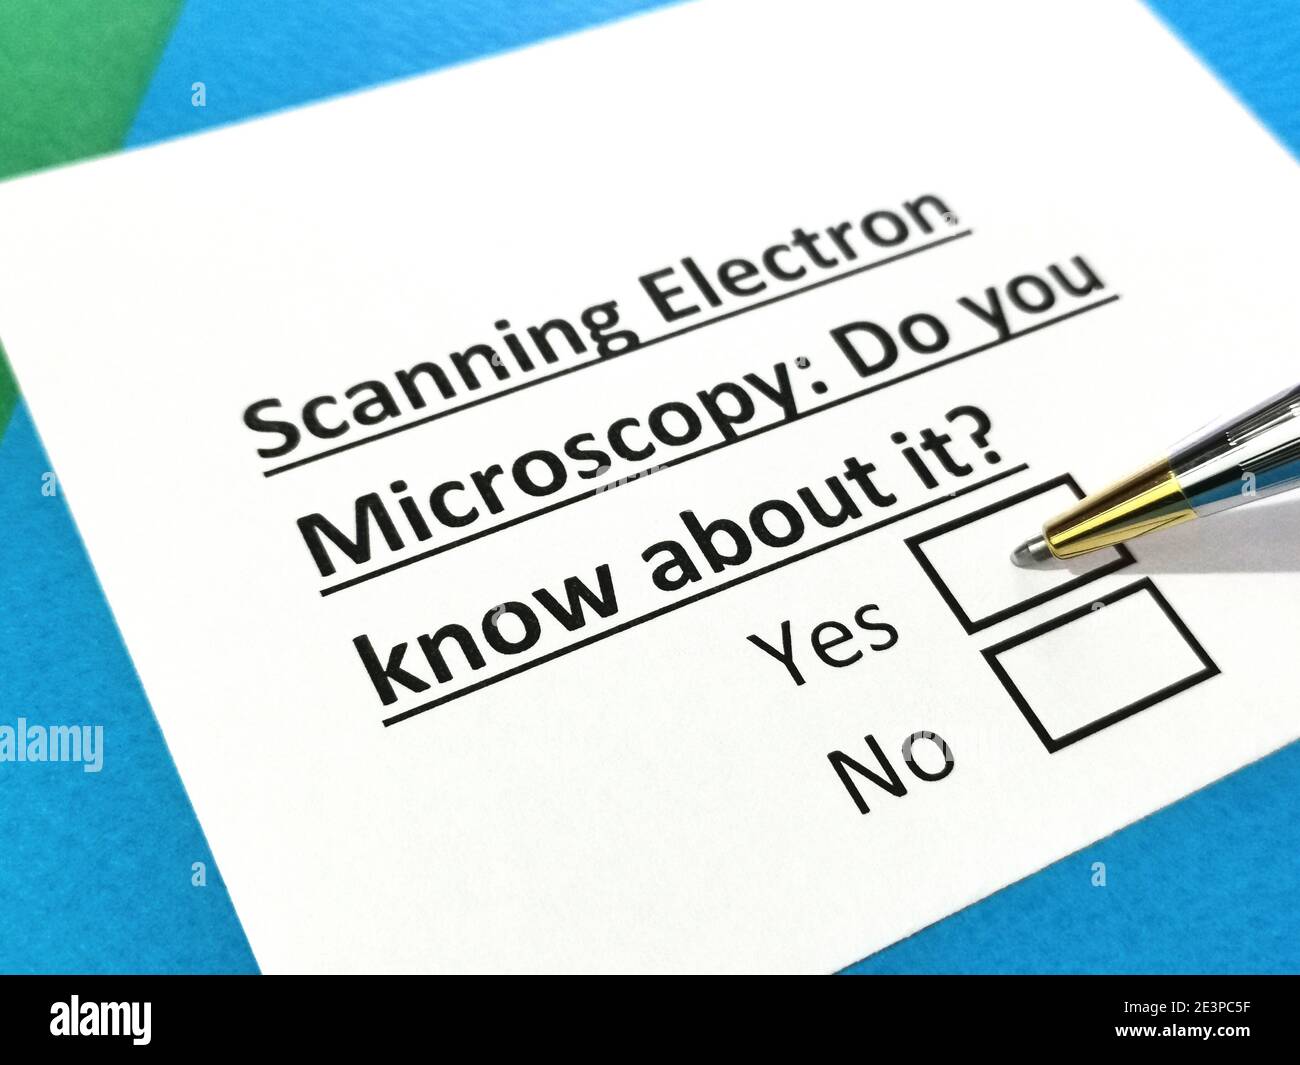 One person is answering question about scanning electron microscopy. Stock Photo